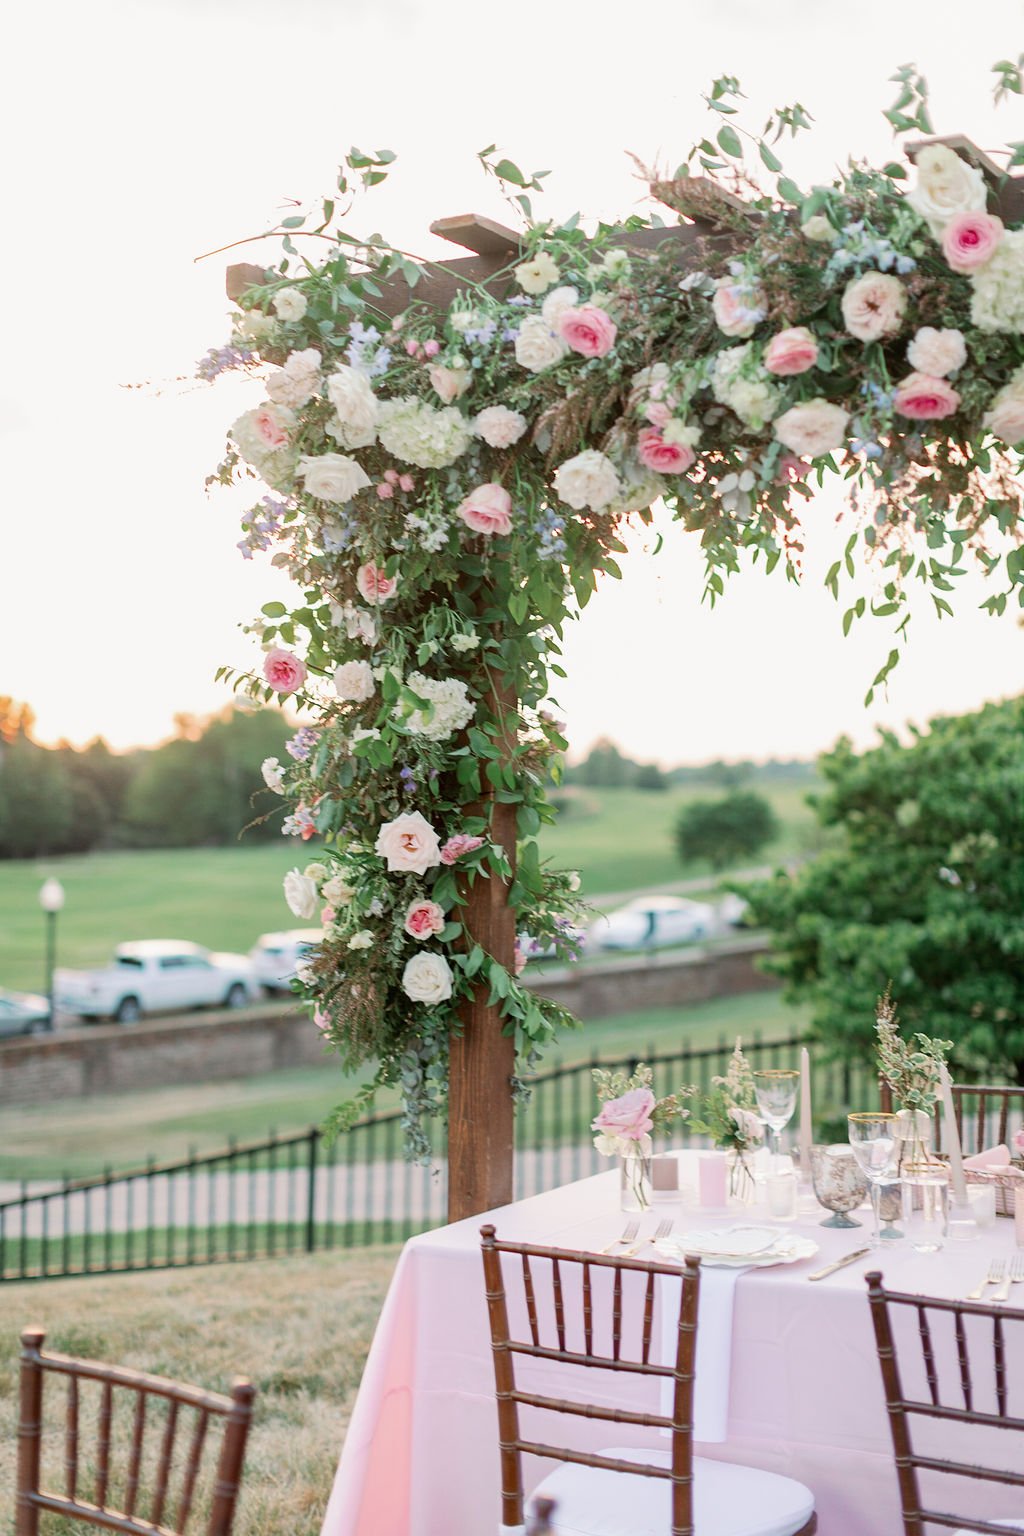 This private estate garden-inspired head table pergola is covered with pink and ivory roses, majolica spray roses, heirloom carnations, blue delphinium, hydrangea and natural greenery. Designed by Rosemary & Finch in Nashville, TN.